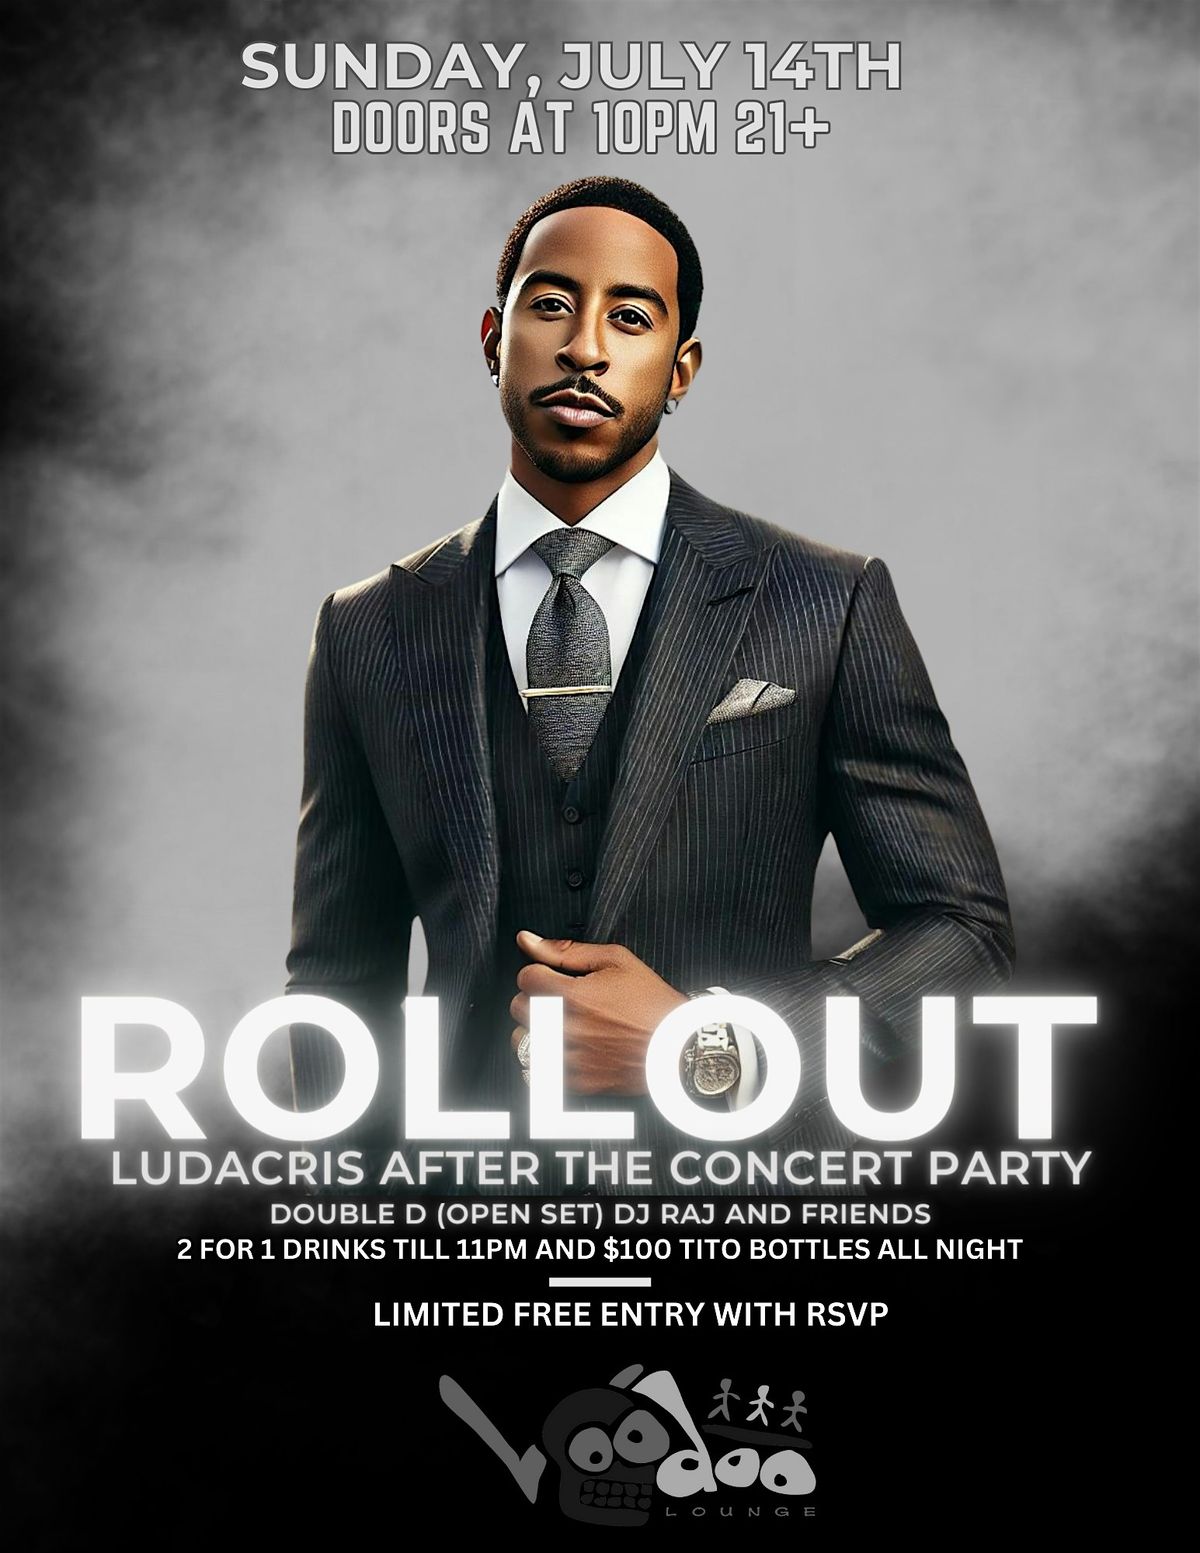 ROLL OUT SUNDAY - LUDACRIS AFTER THE CONCERT PARTY